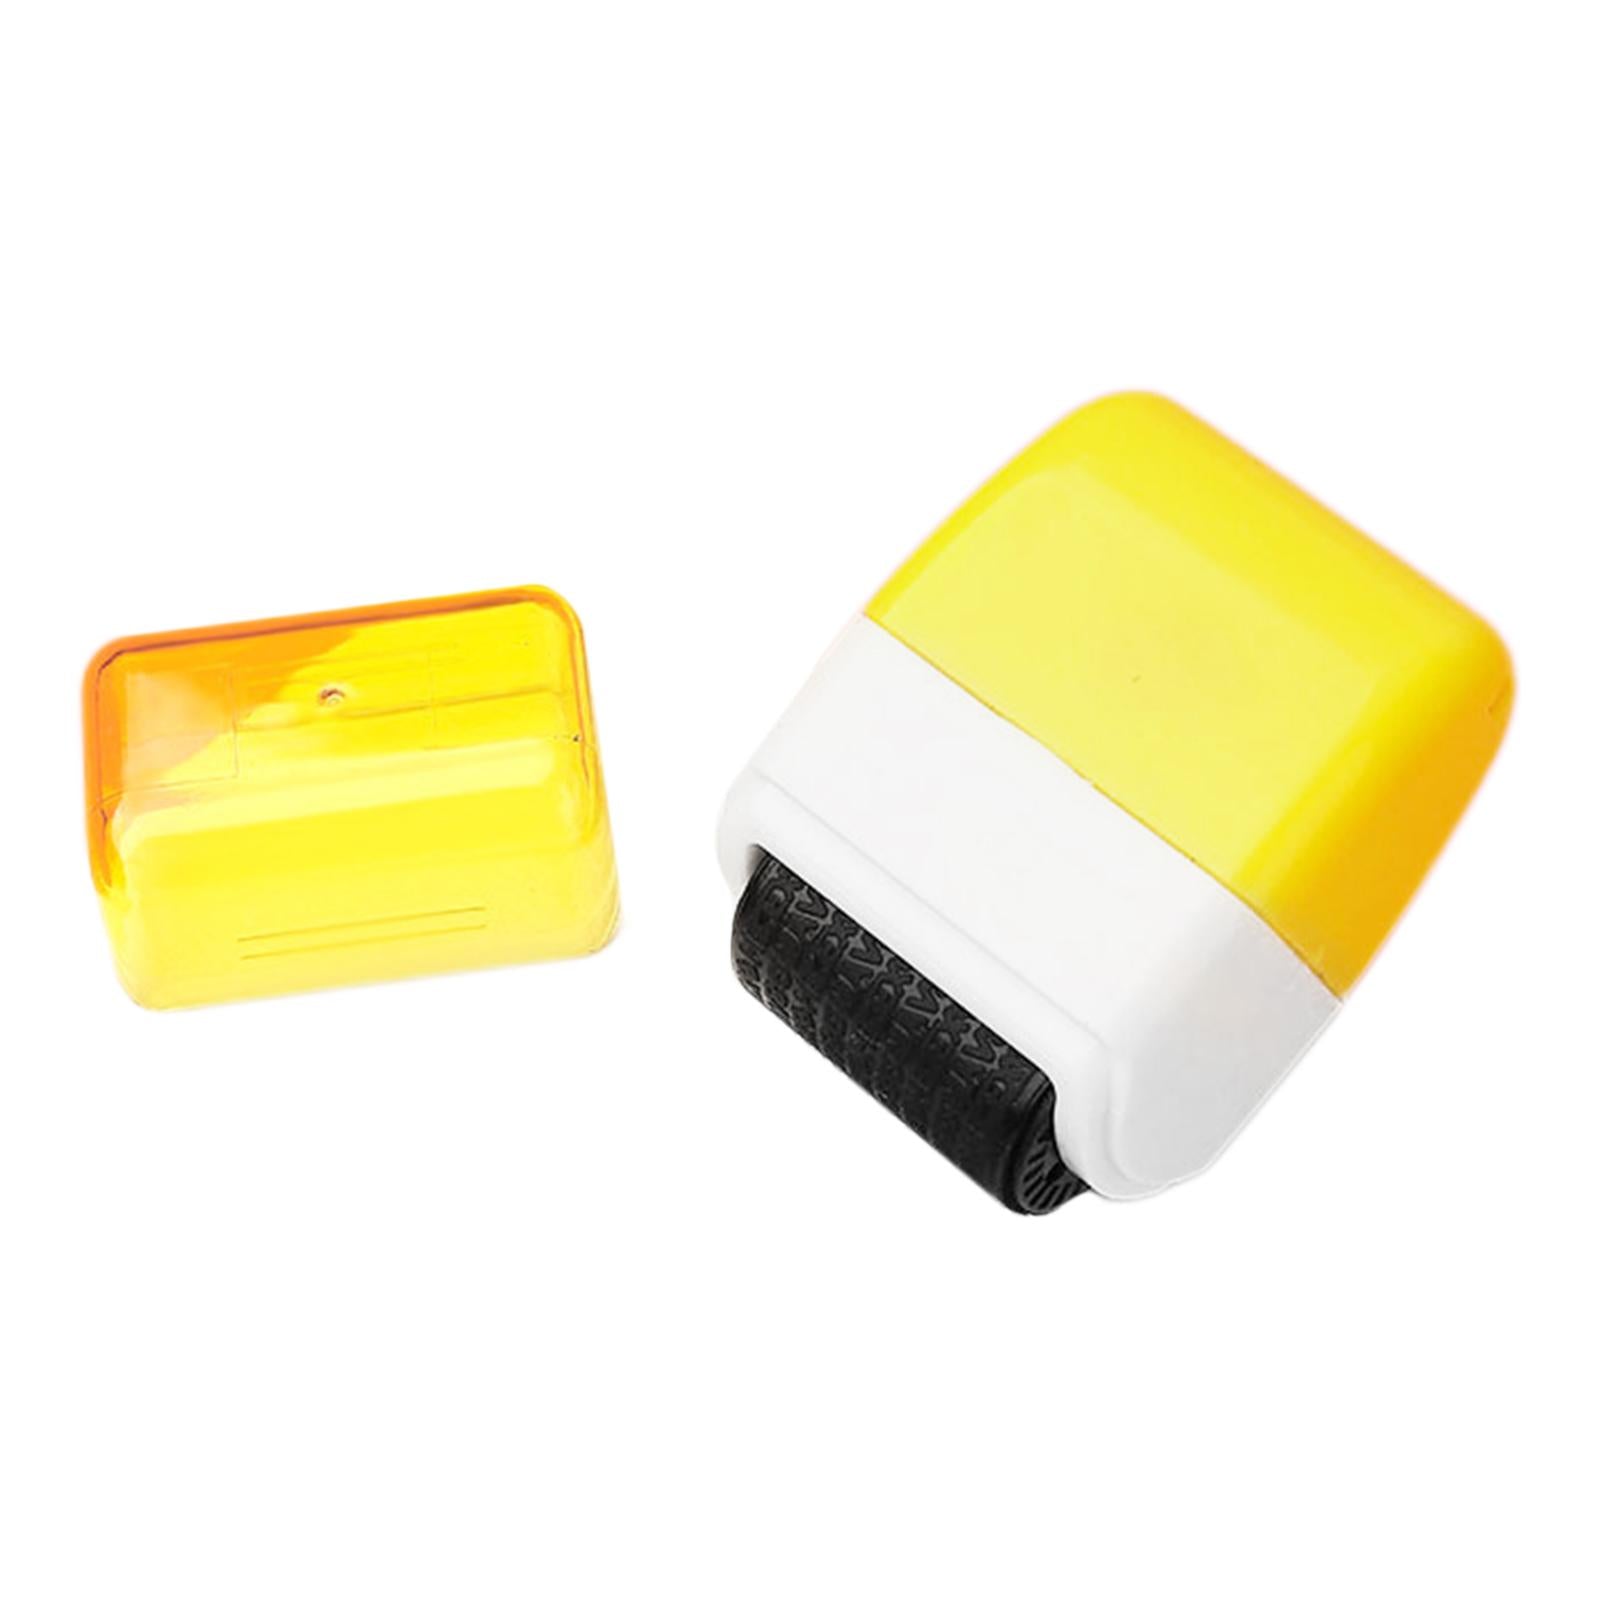 Protection Privacy Data Roller Stamp Seal Defend ID Information Security Yellow